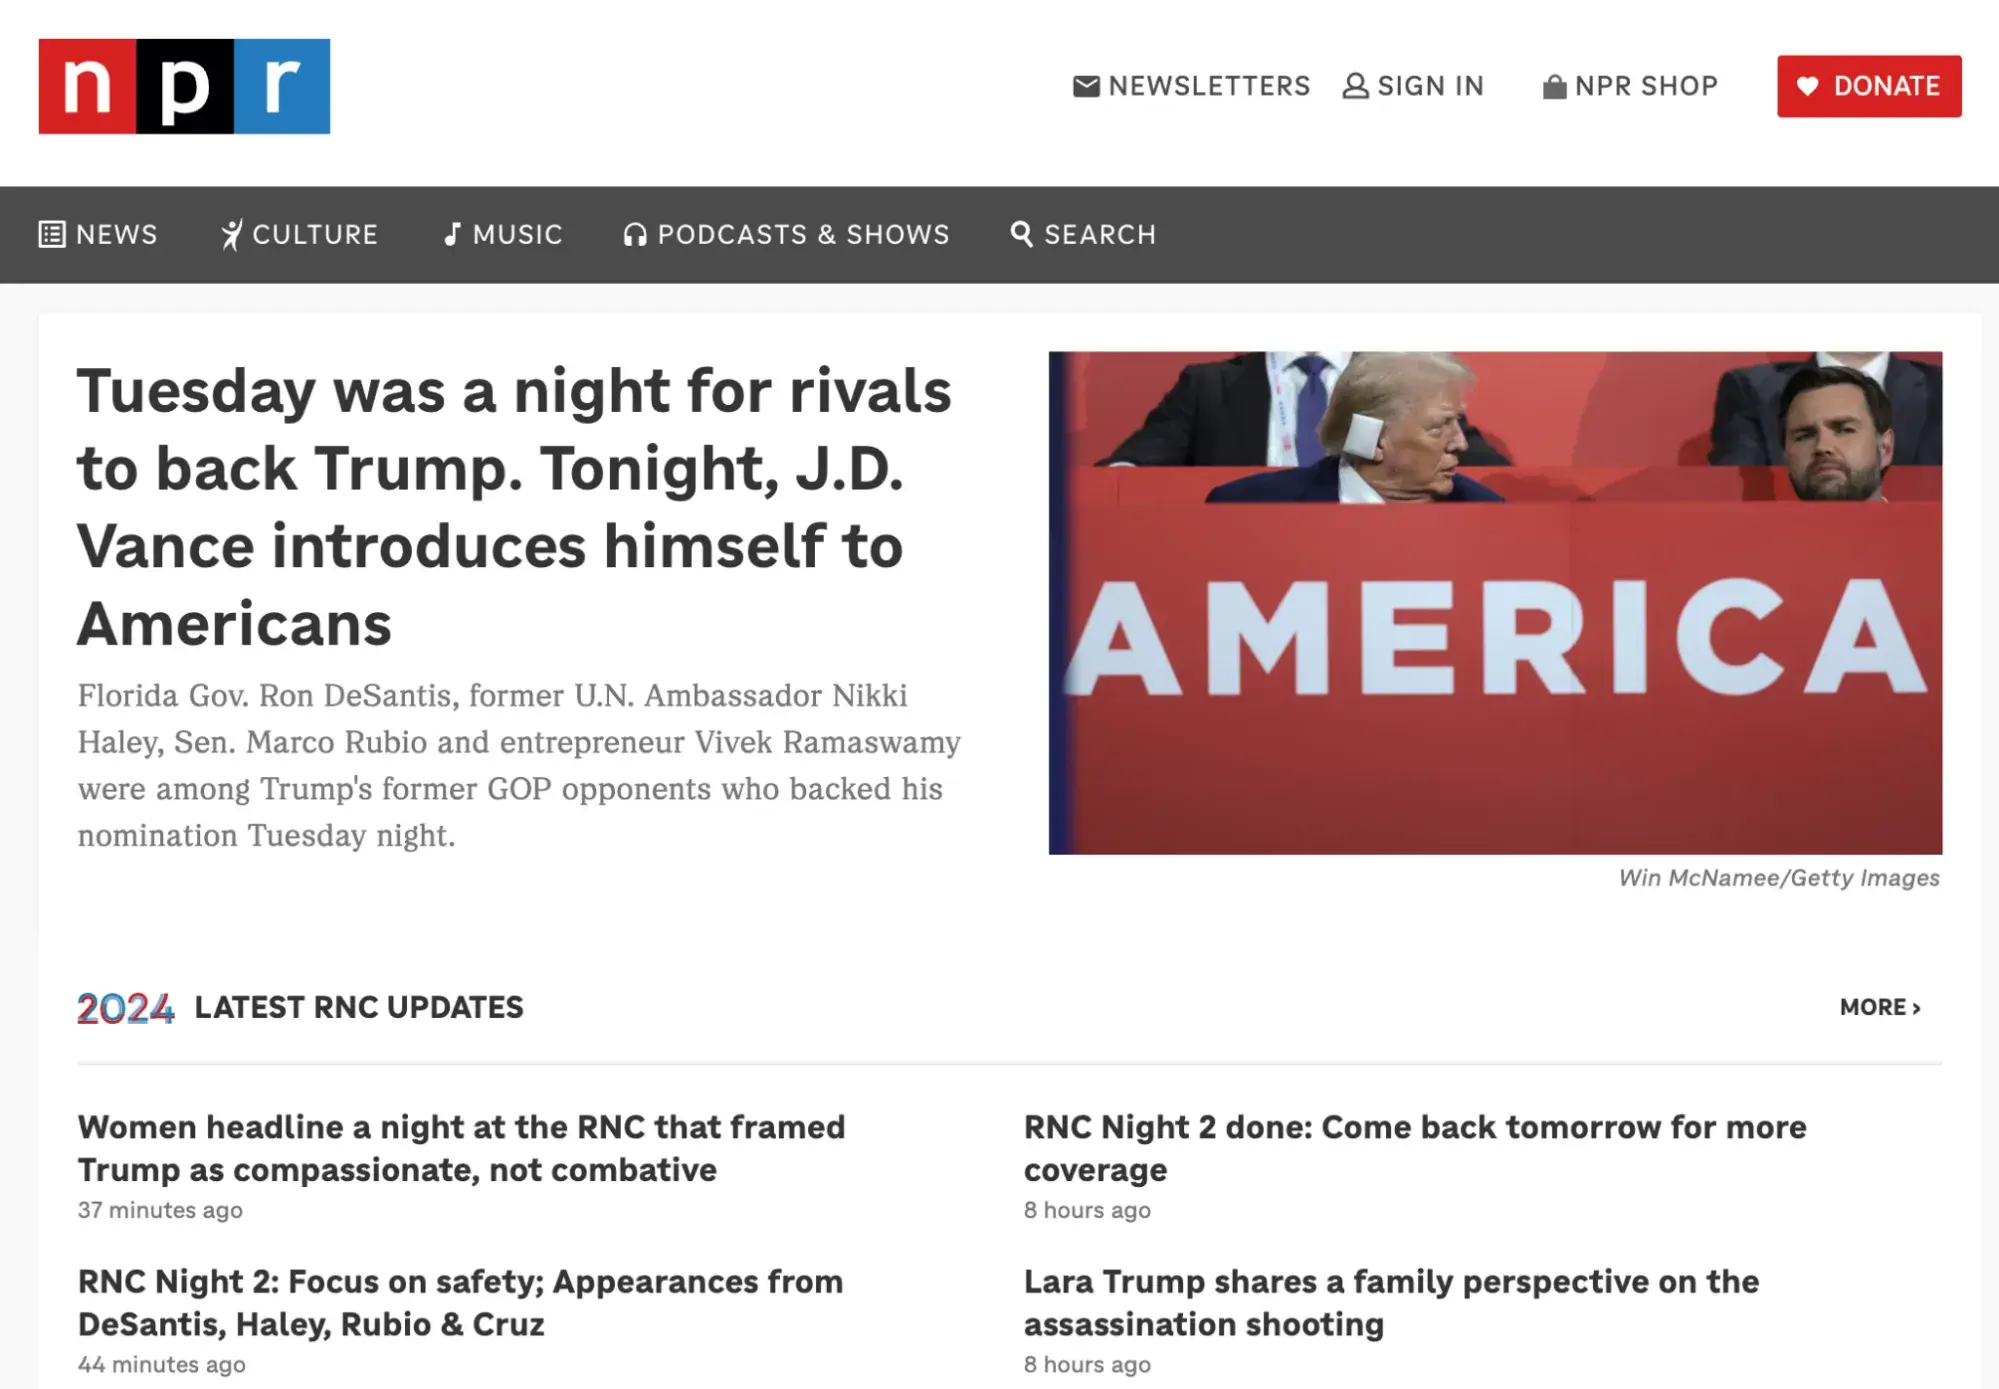  NPR’s website offers a great example of simple, accessible design